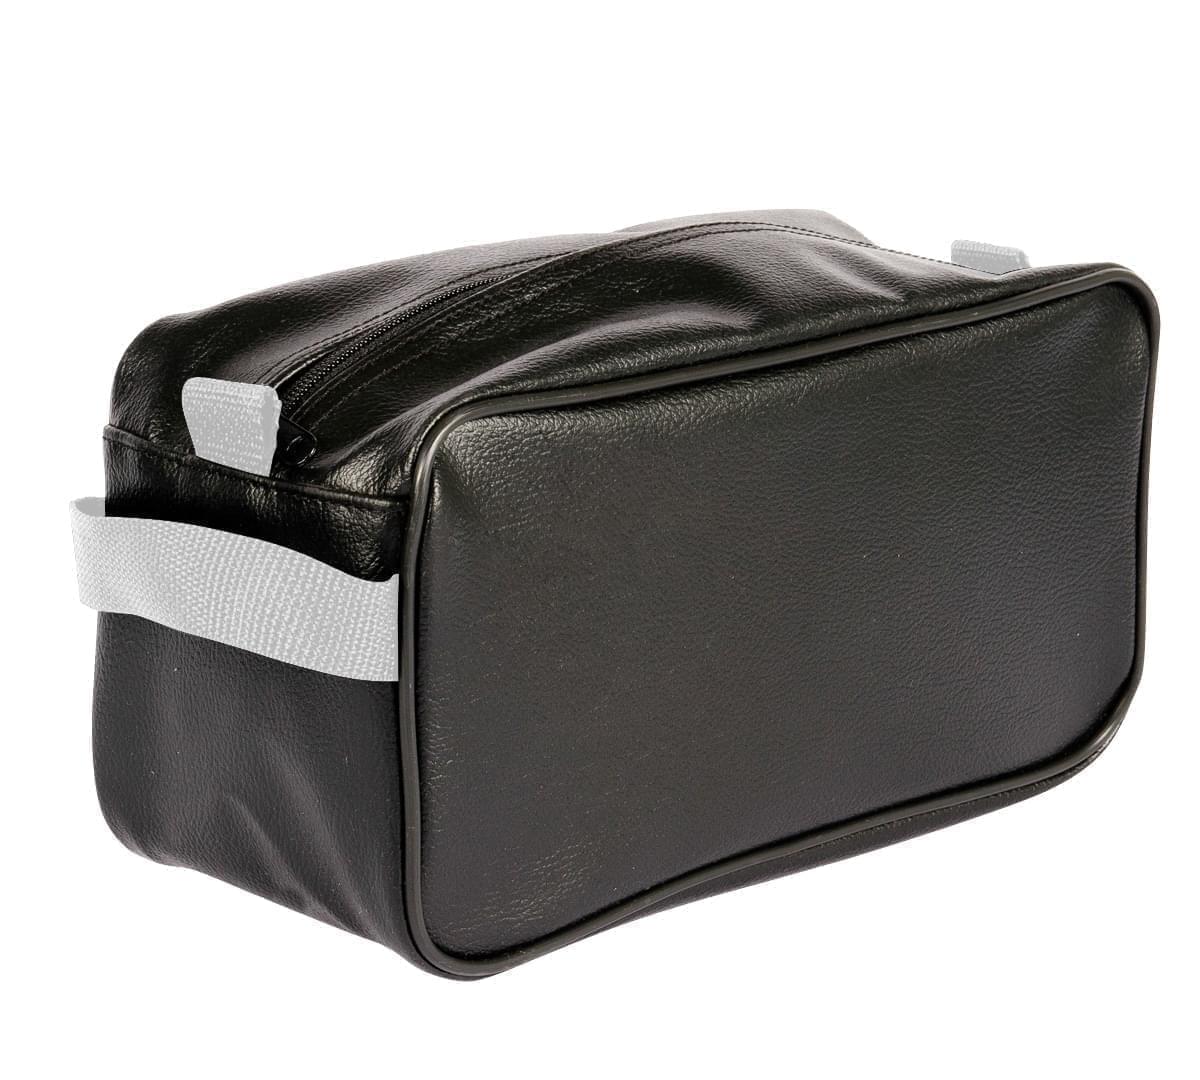 USA Made Cosmetic & Toiletry Cases, Black-White, 3000996-AO4